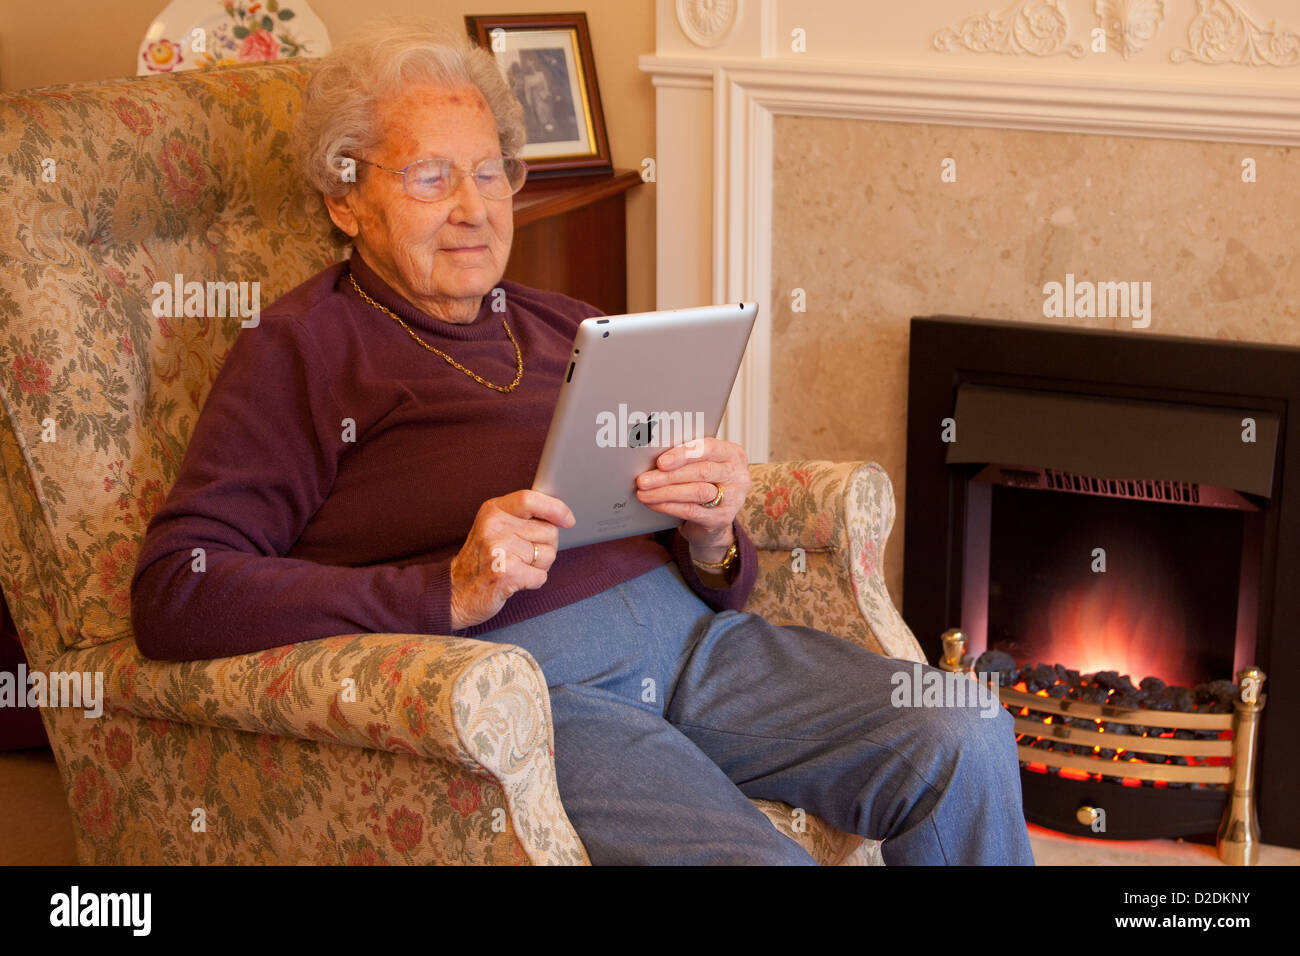 Elderly woman pensioner with glasses relaxing on chair reading her ipad tablet Stock Photo